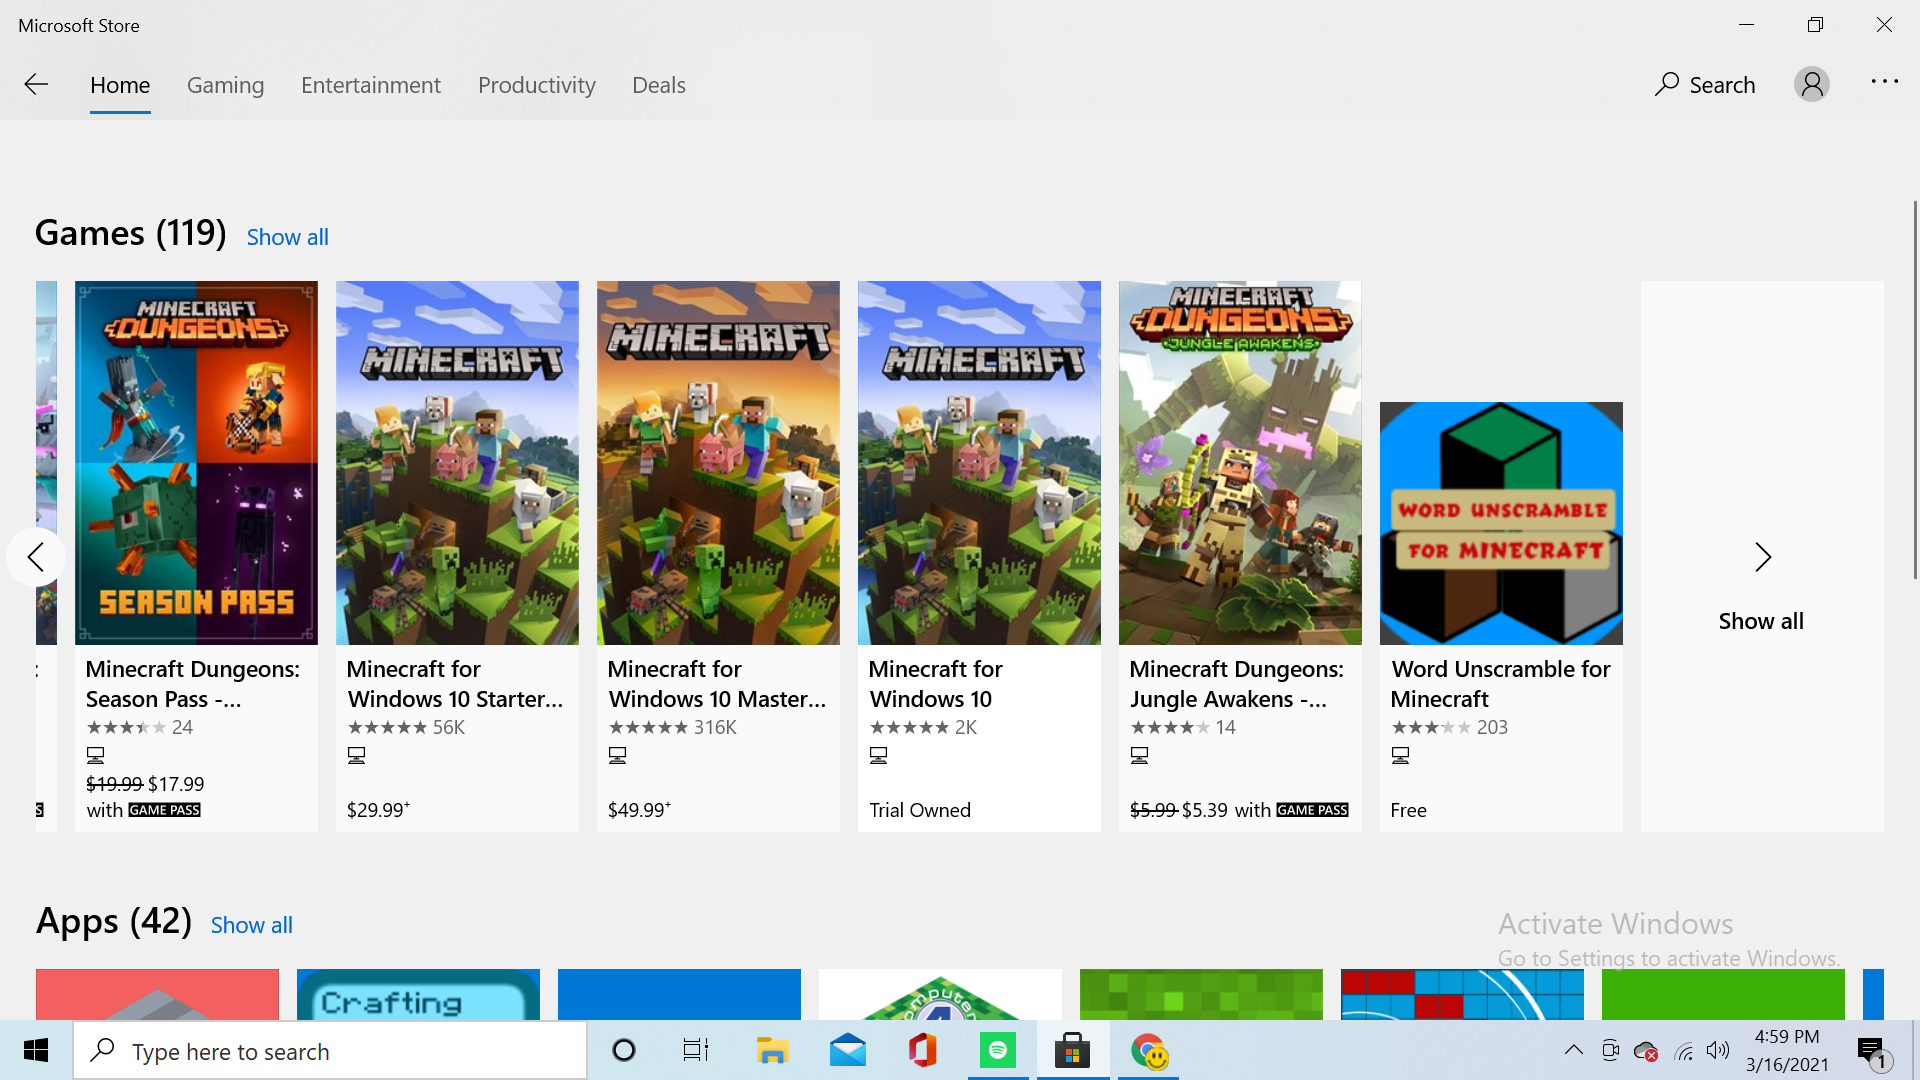 Gnaven krybdyr Blitz Minecraft Is Not Free With Xbox Game Pass Ultimate, While It Should -  Microsoft Community